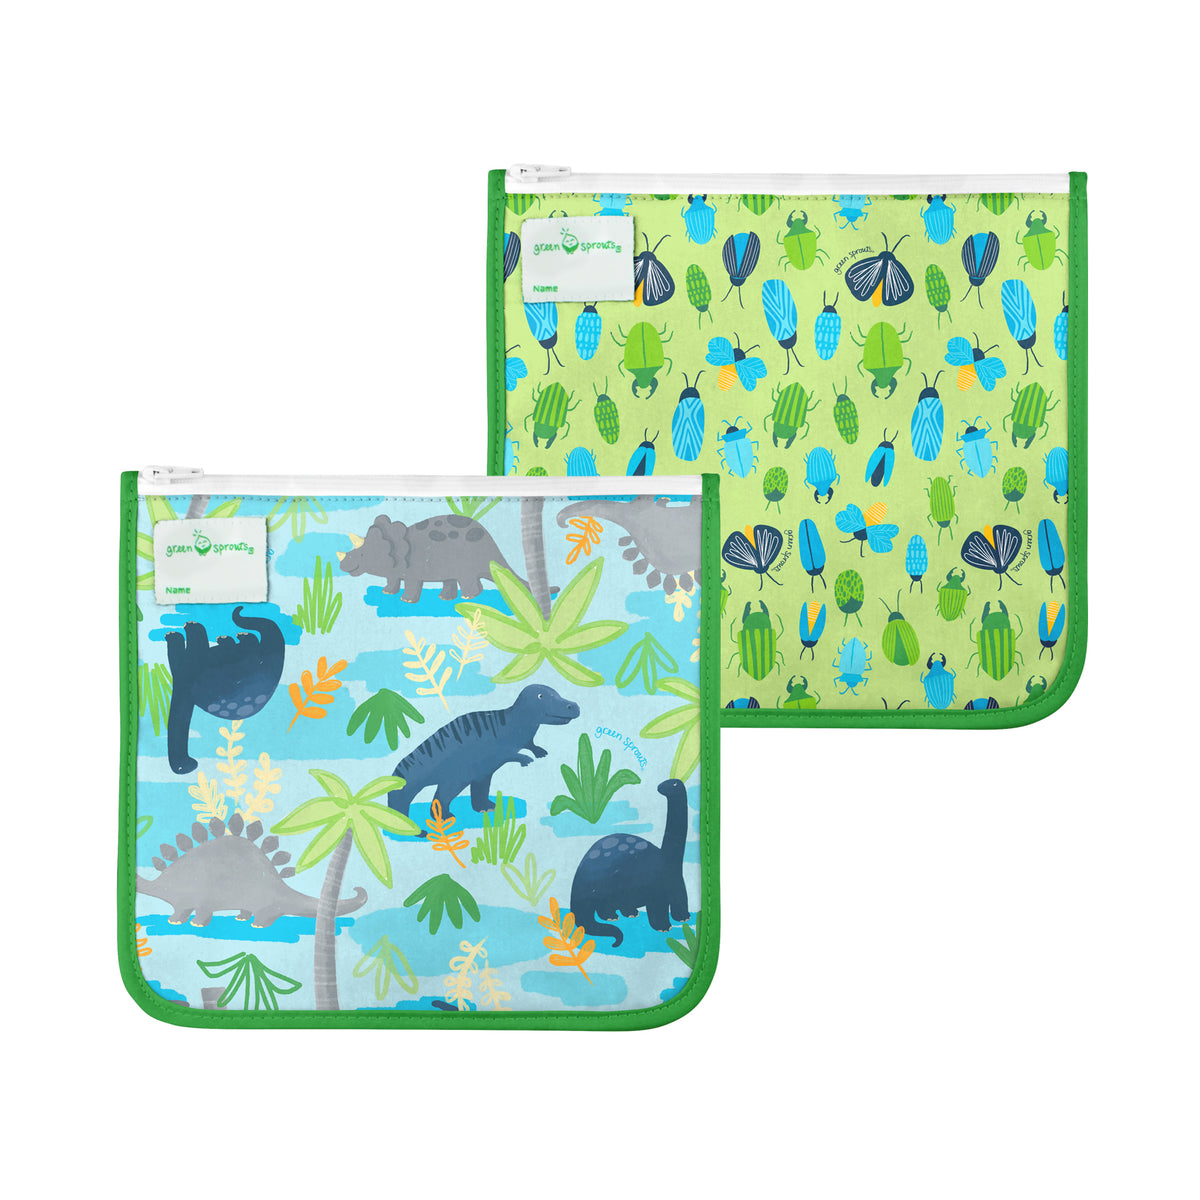 Green Sprouts Reusable Snack Bags 2 Pack - Kids Babies 6+ Months